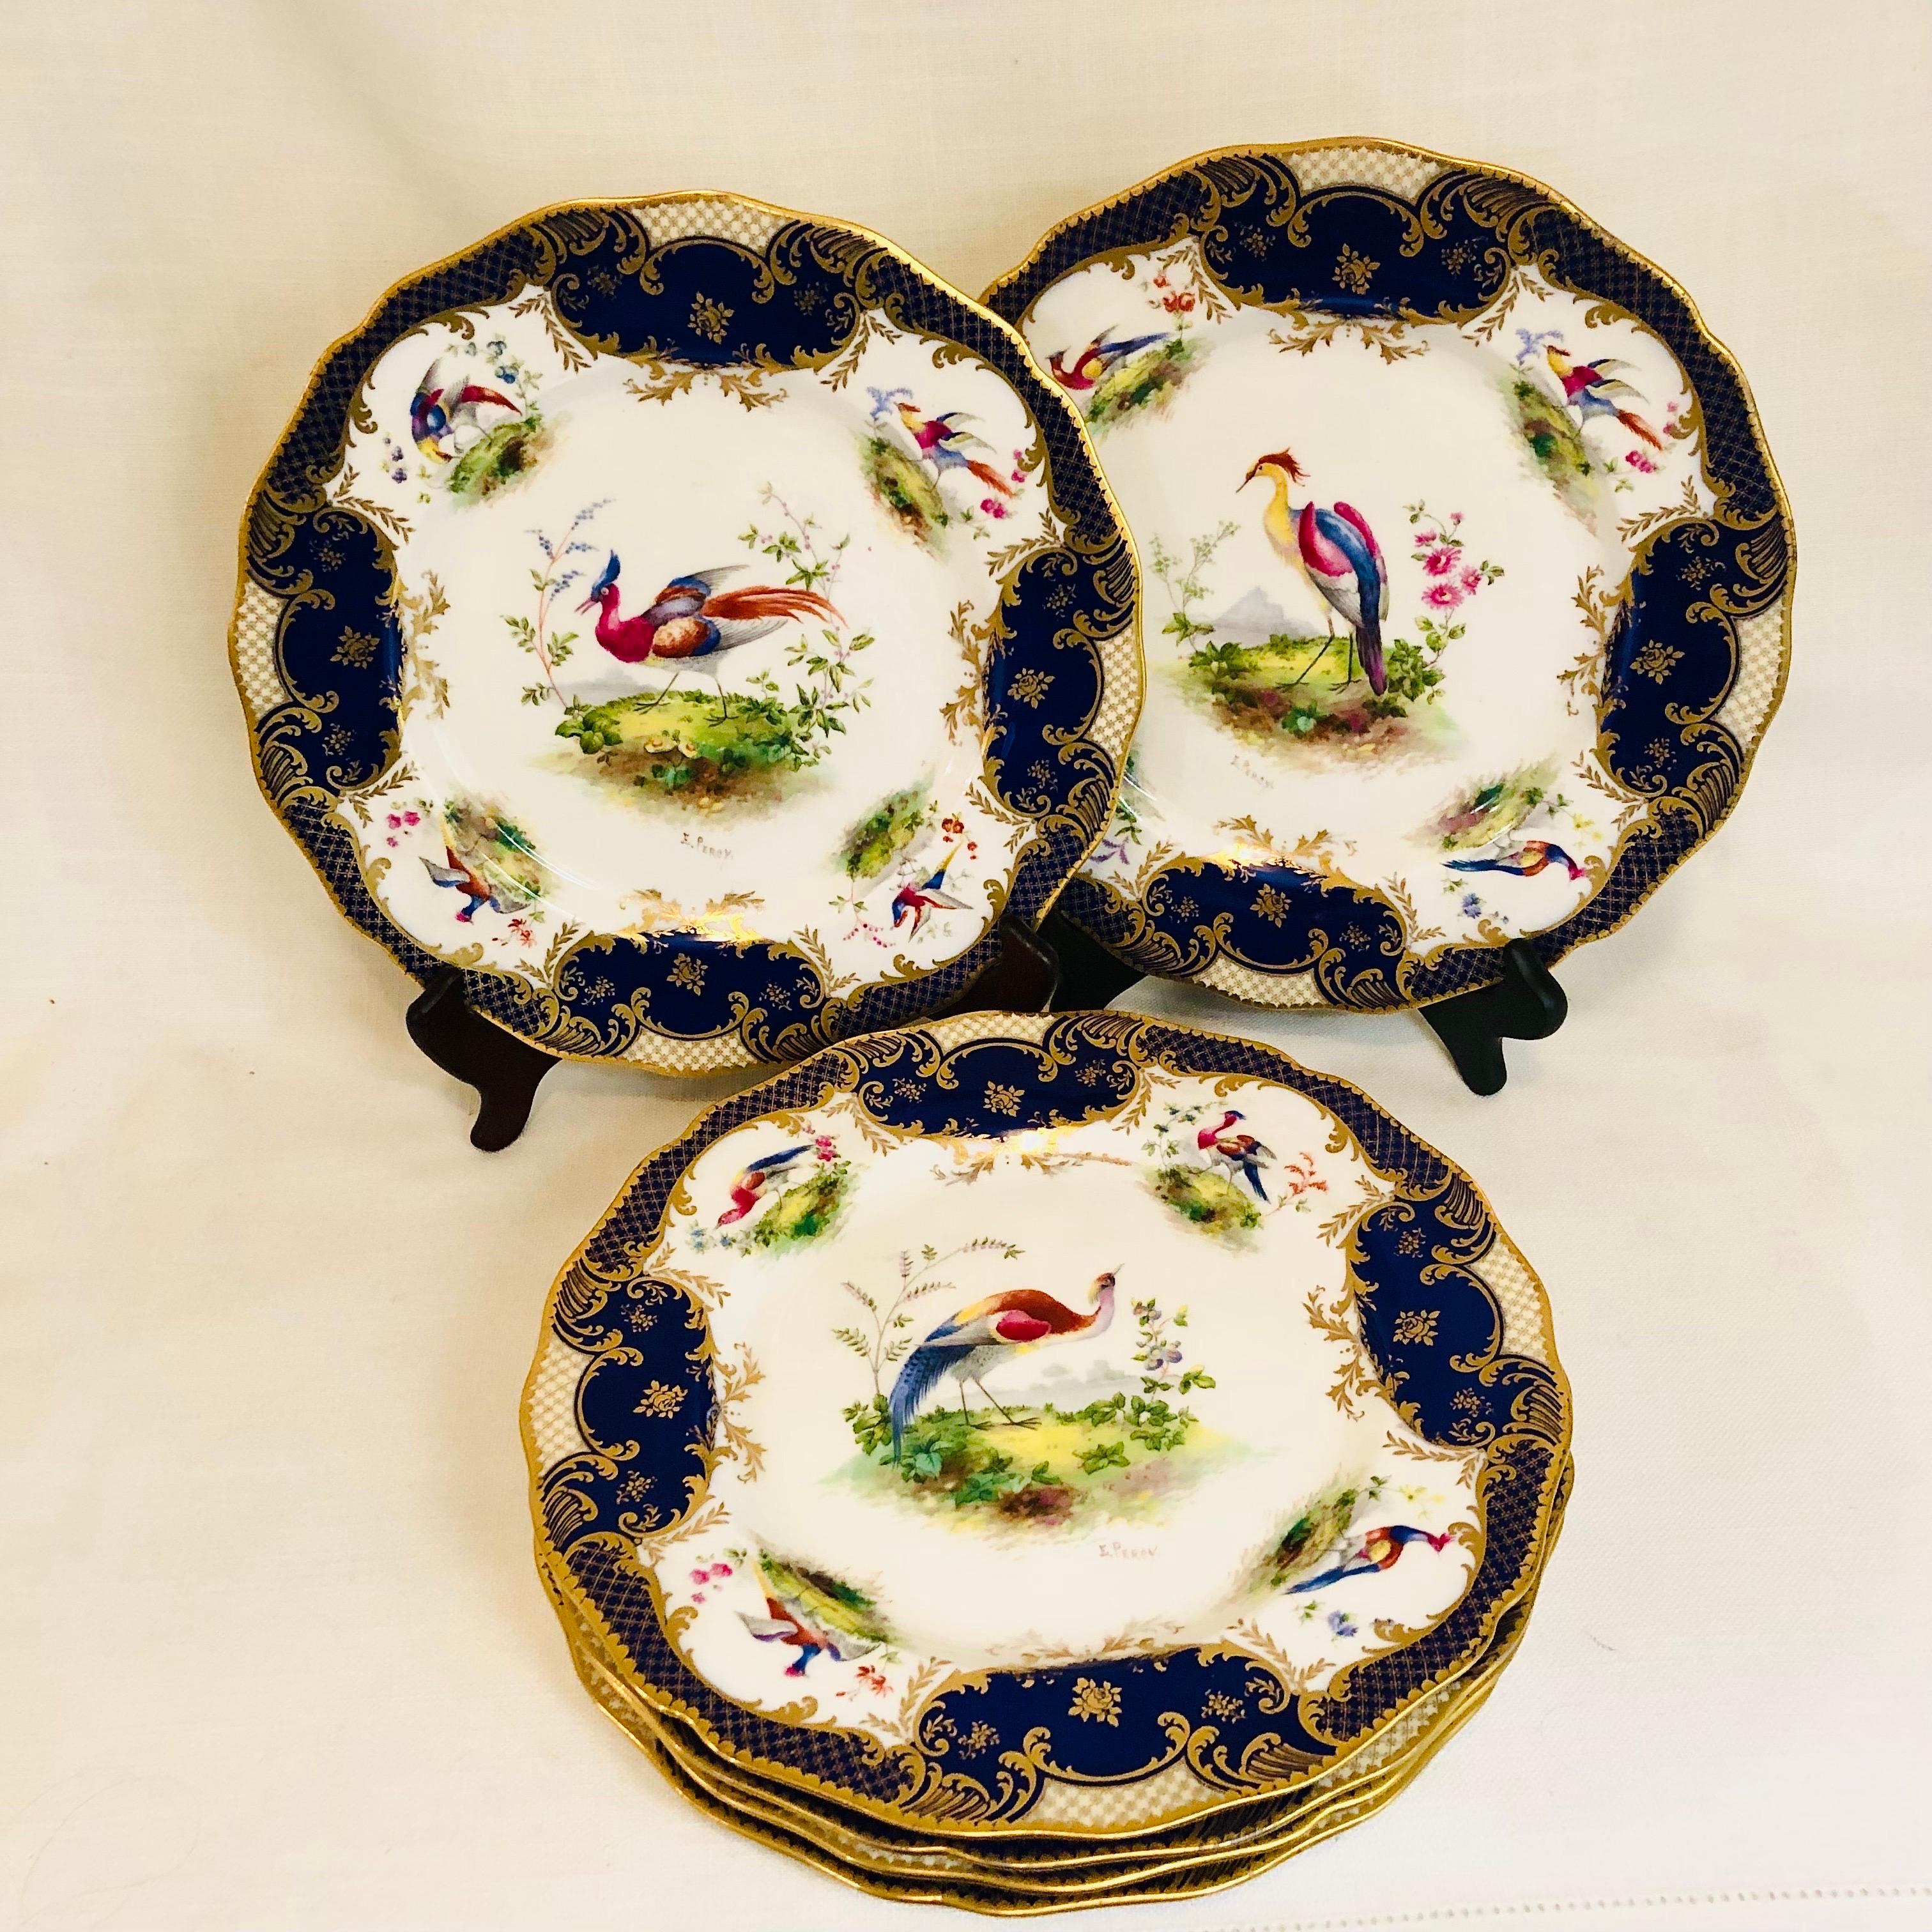 Set of 6 Cobalt Royal Doulton Made for Tiffany Dinner Plates with Exotic Birds 1